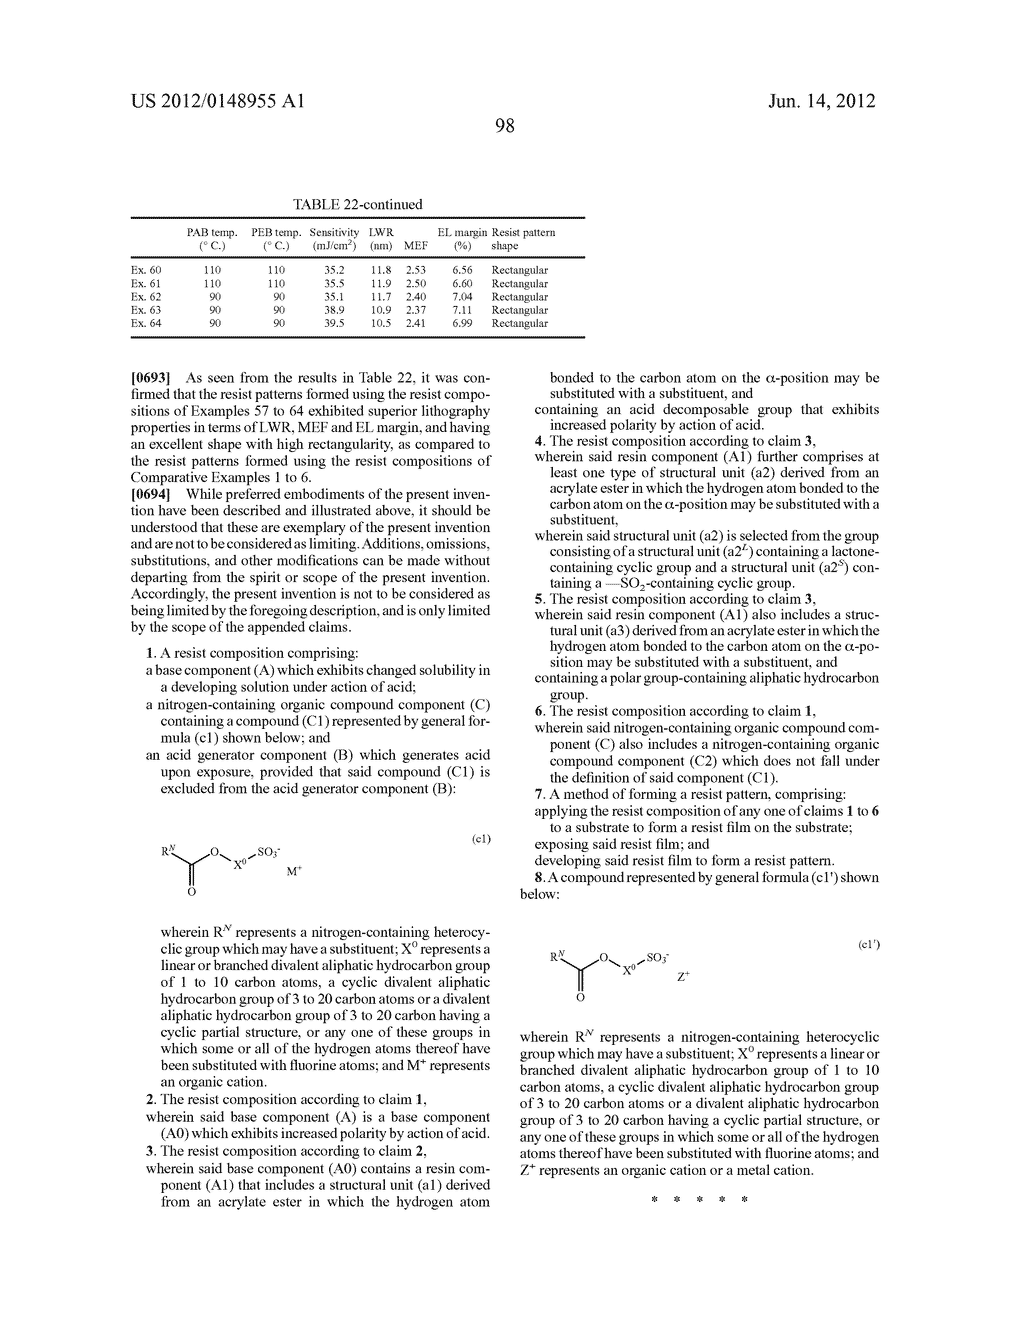 RESIST COMPOSITION, METHOD OF FORMING RESIST PATTERN, AND NEW COMPOUND - diagram, schematic, and image 99